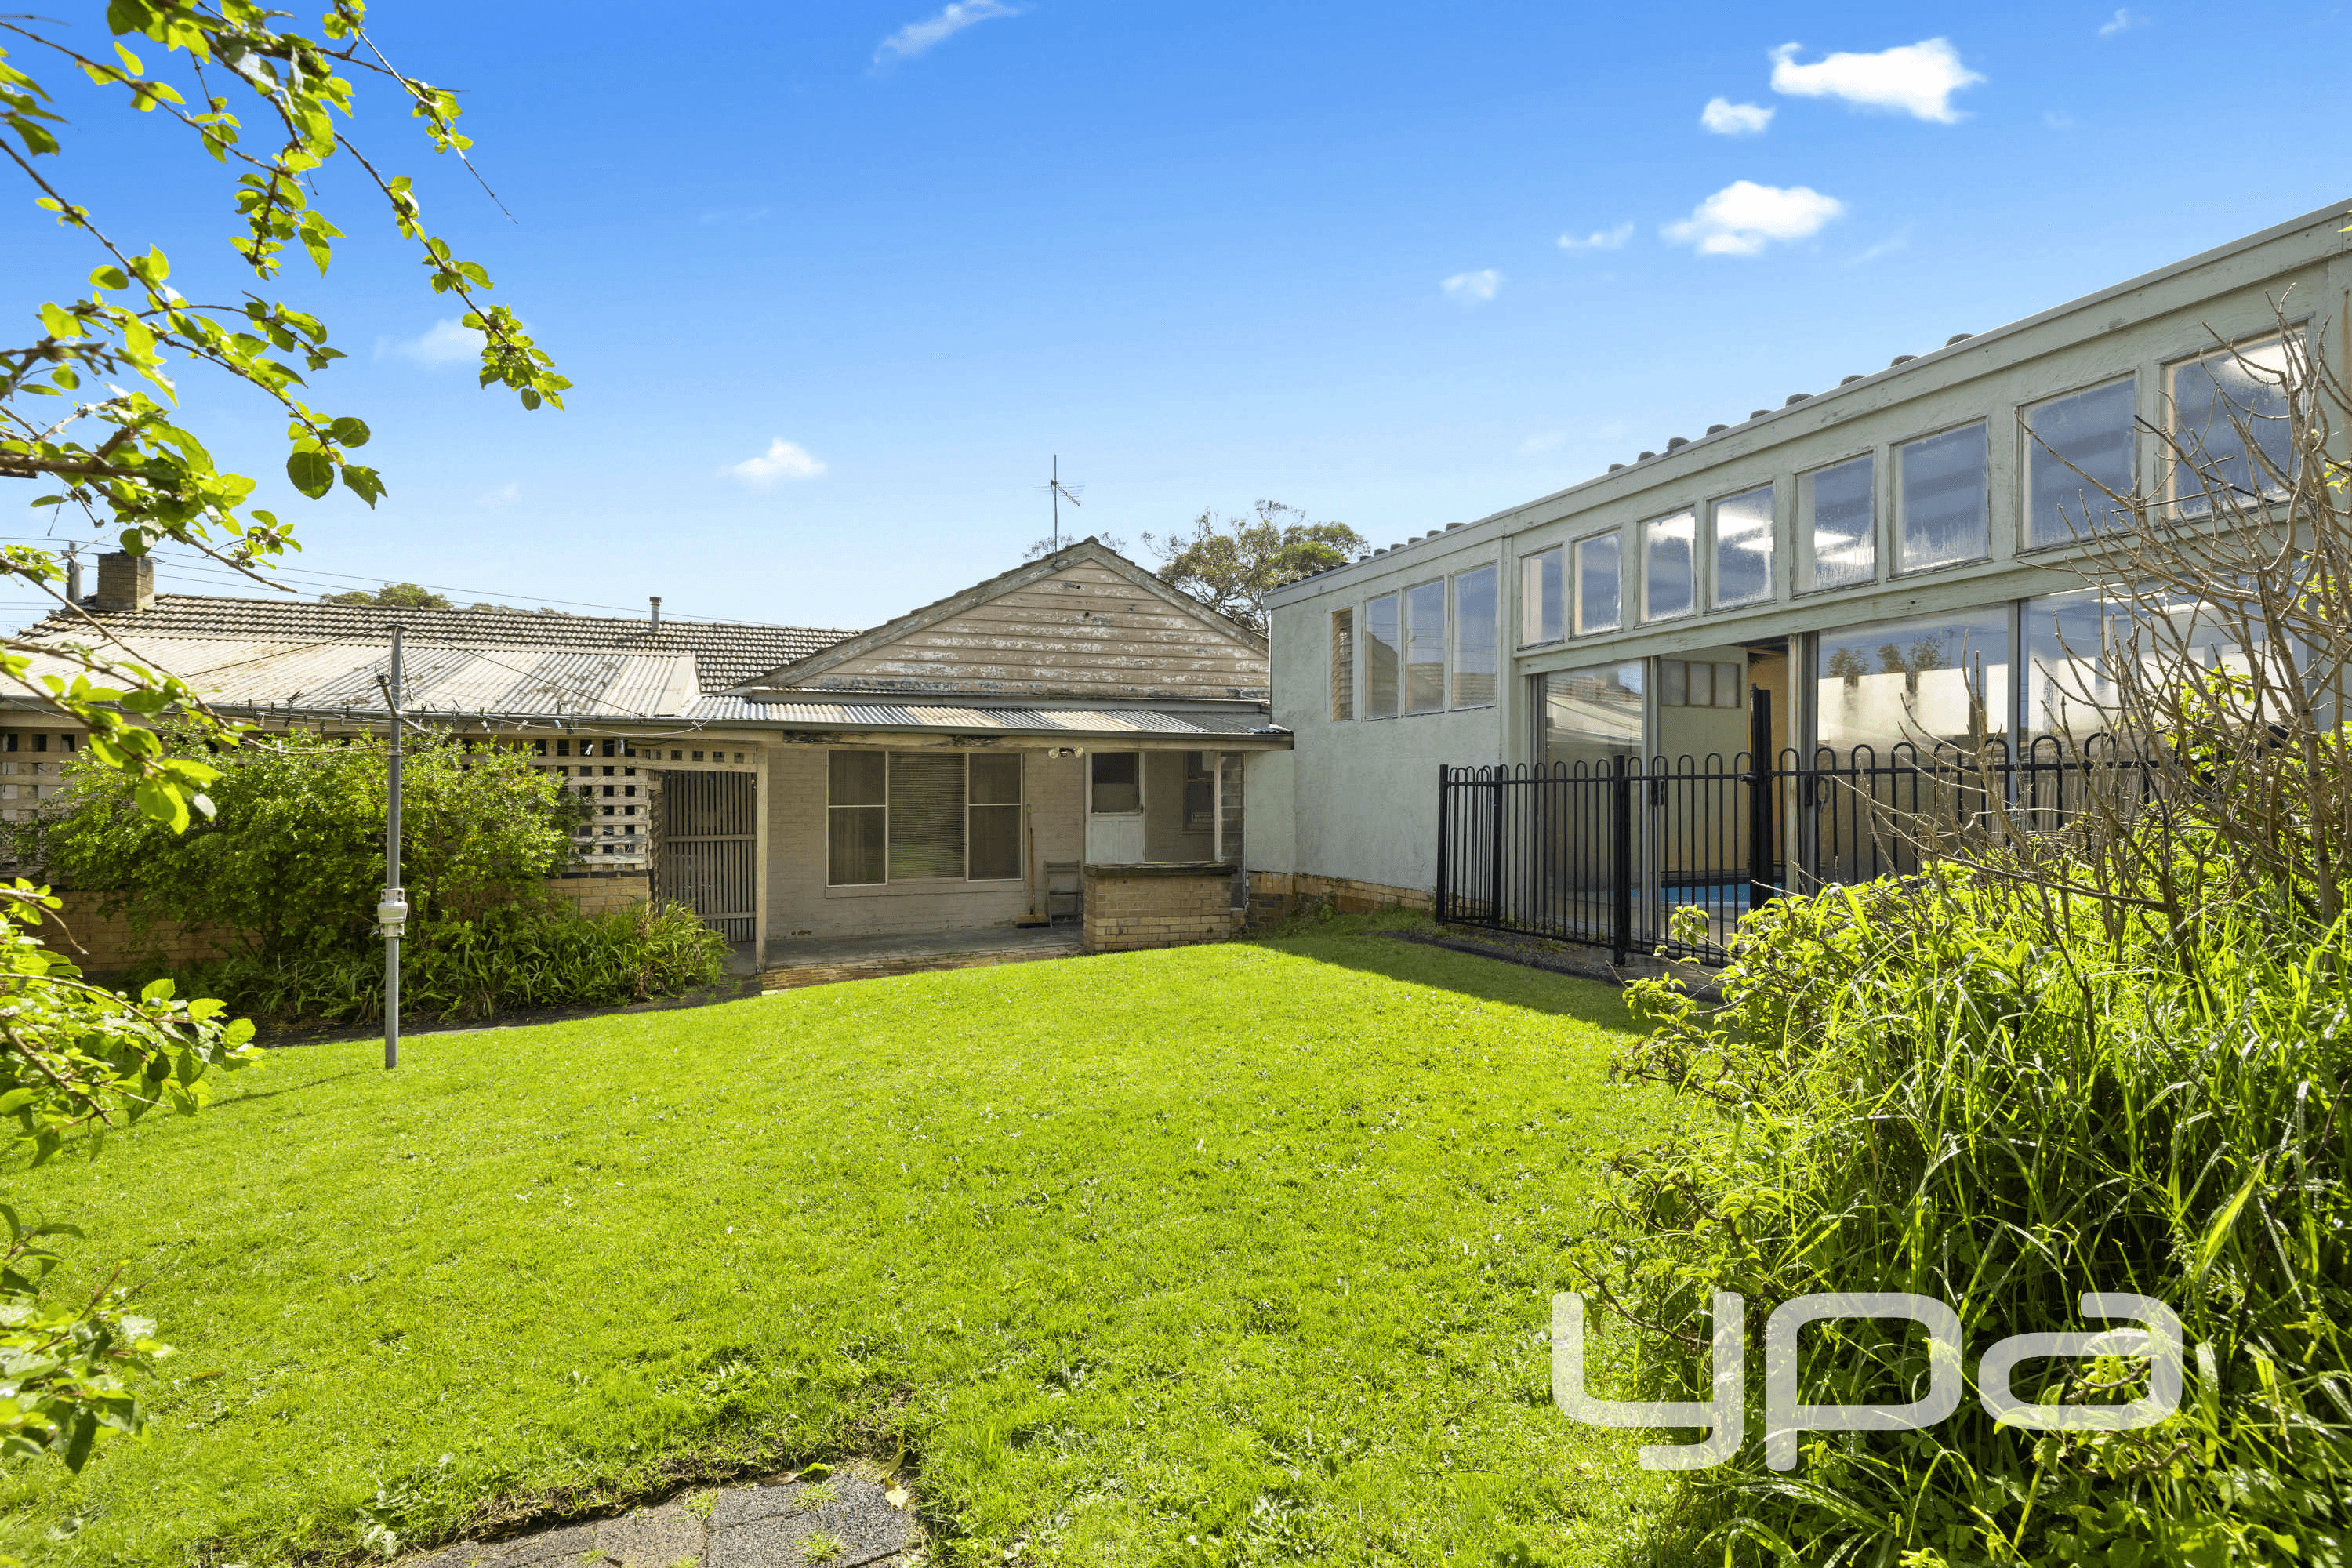 159 Bayview Road, McCrae, VIC 3938